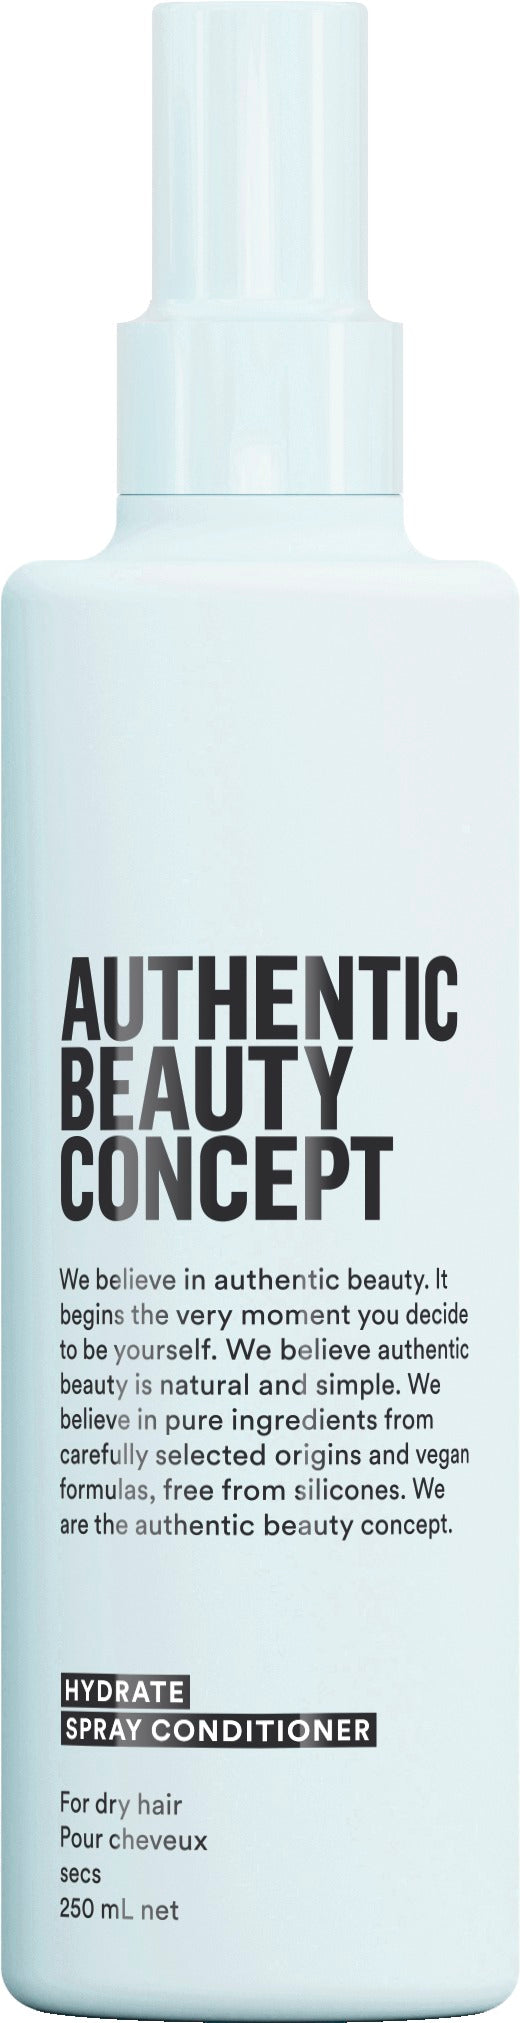 Authentic Beauty Concept - Hydrate Spray Conditioner, 250ml